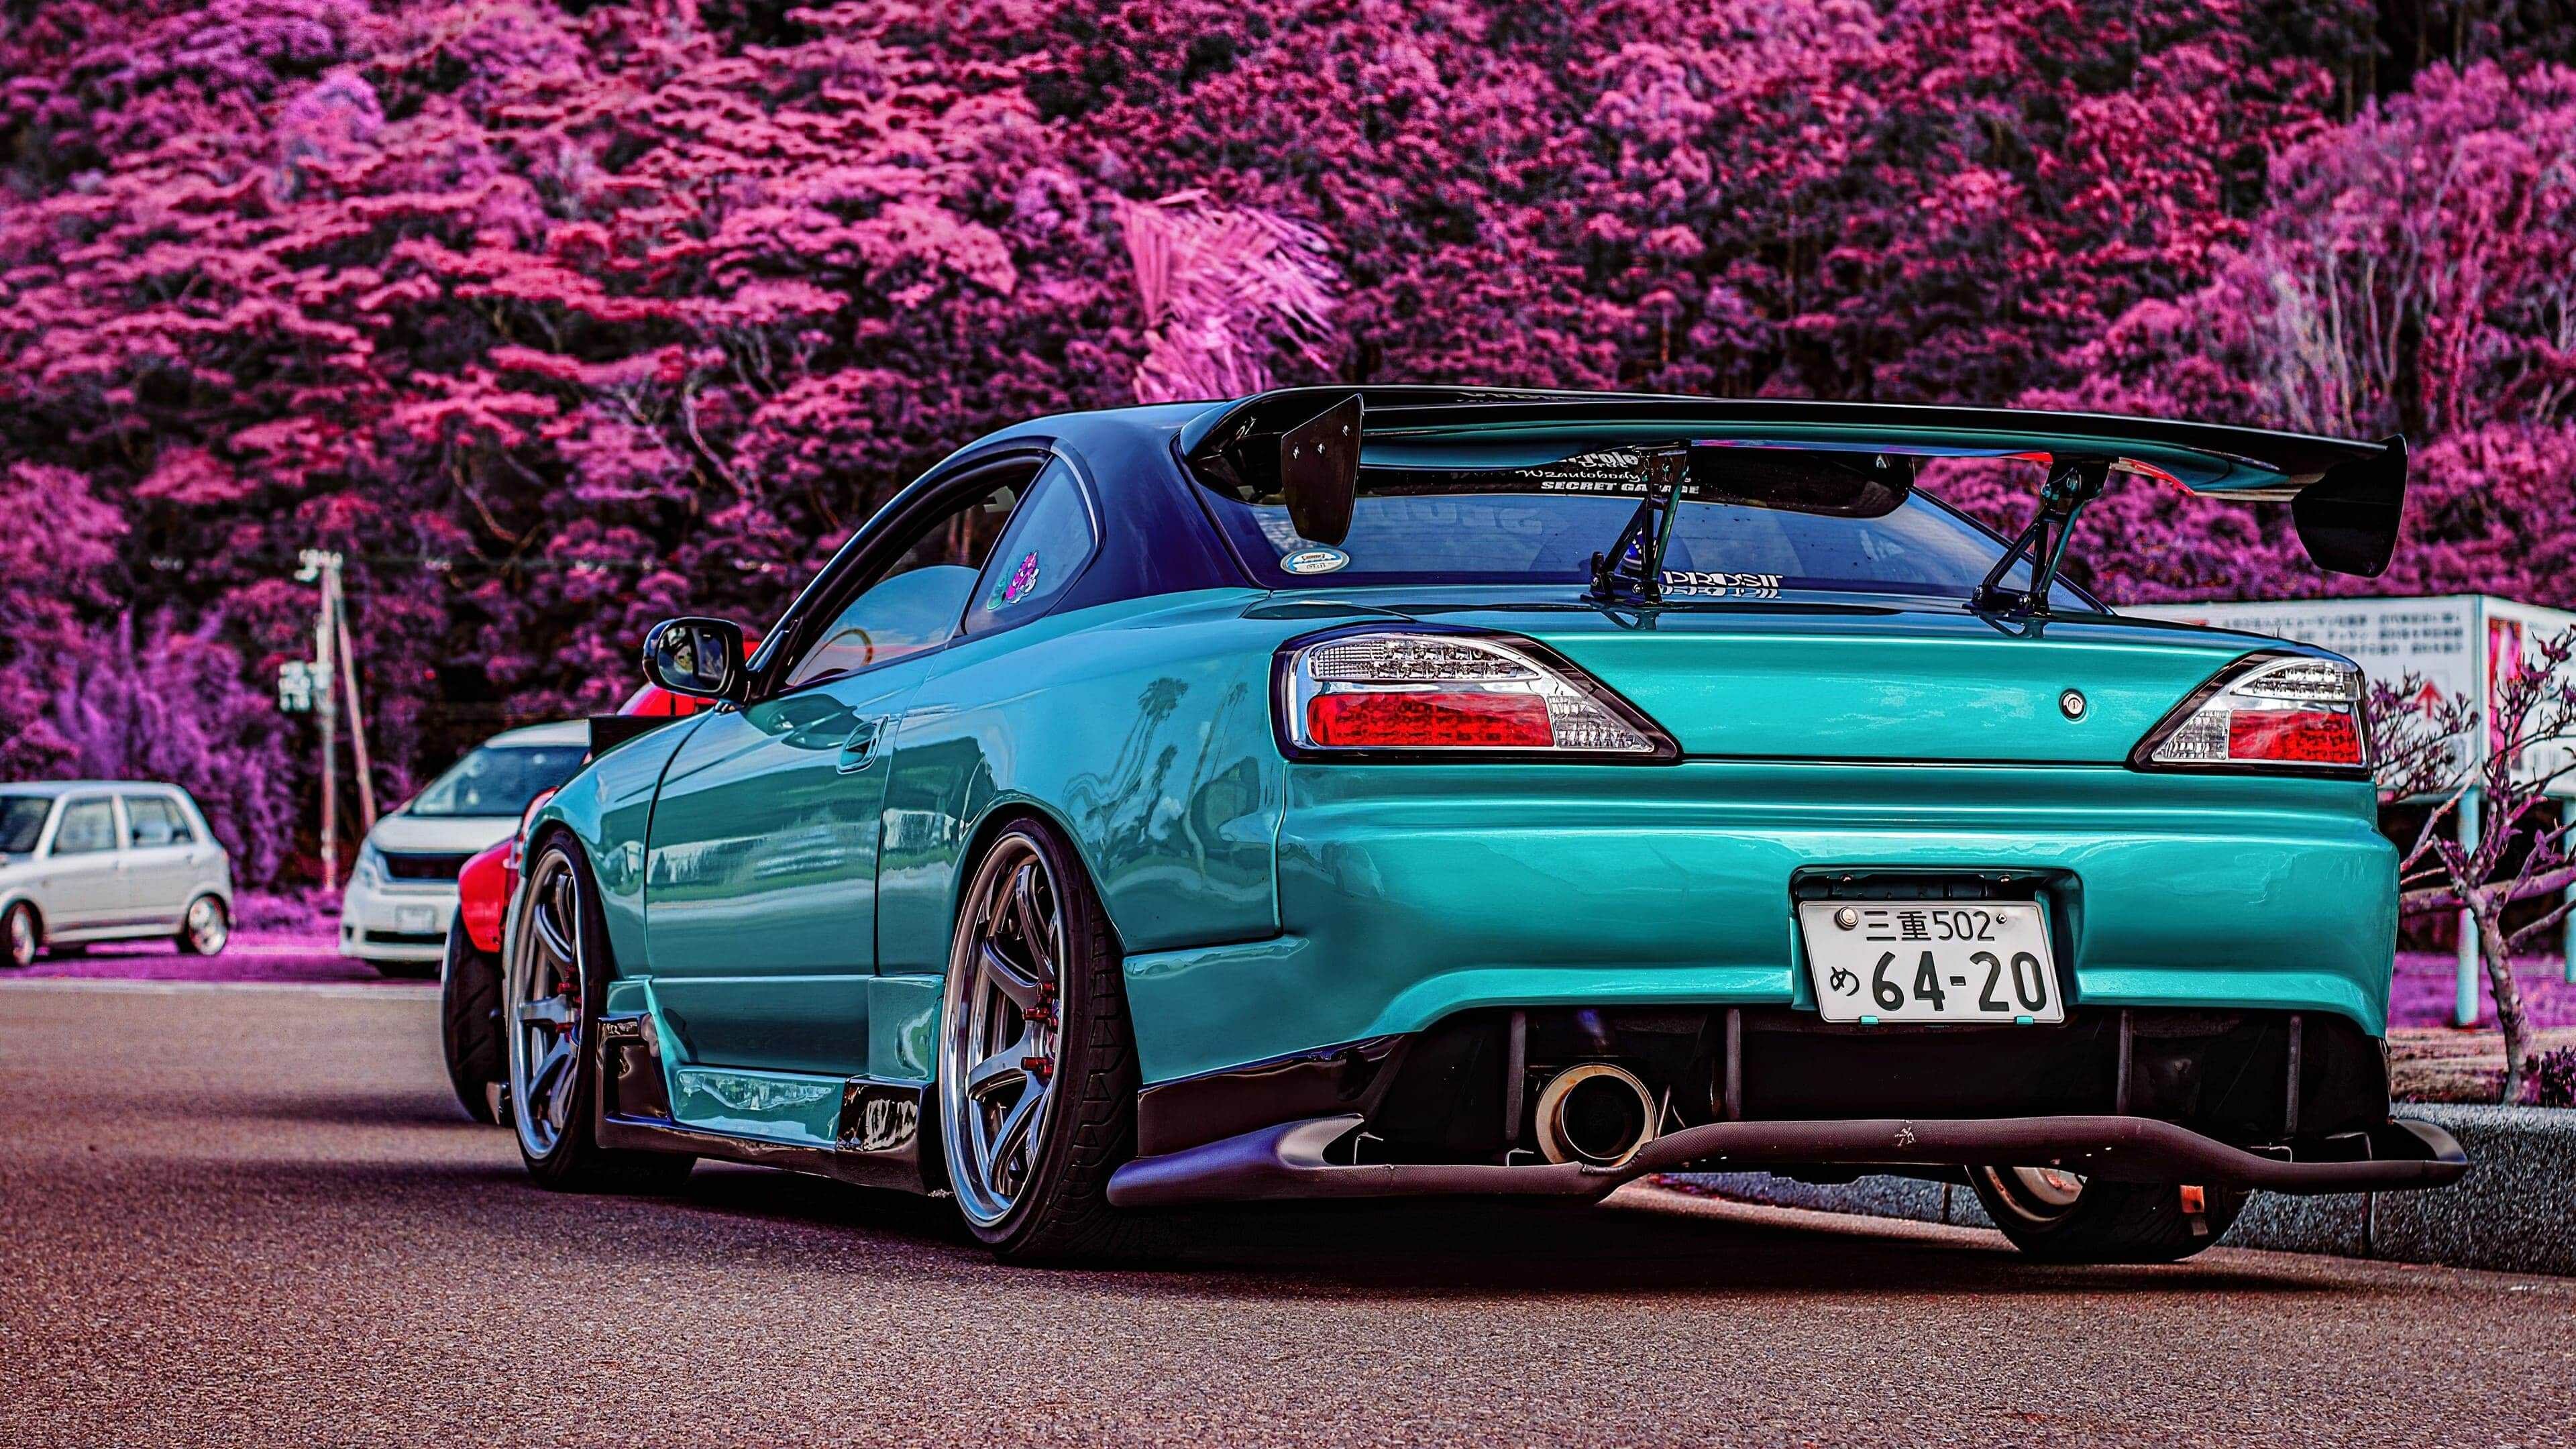 Nissan: Silvia, The series of small sports cars. 3840x2160 4K Background.